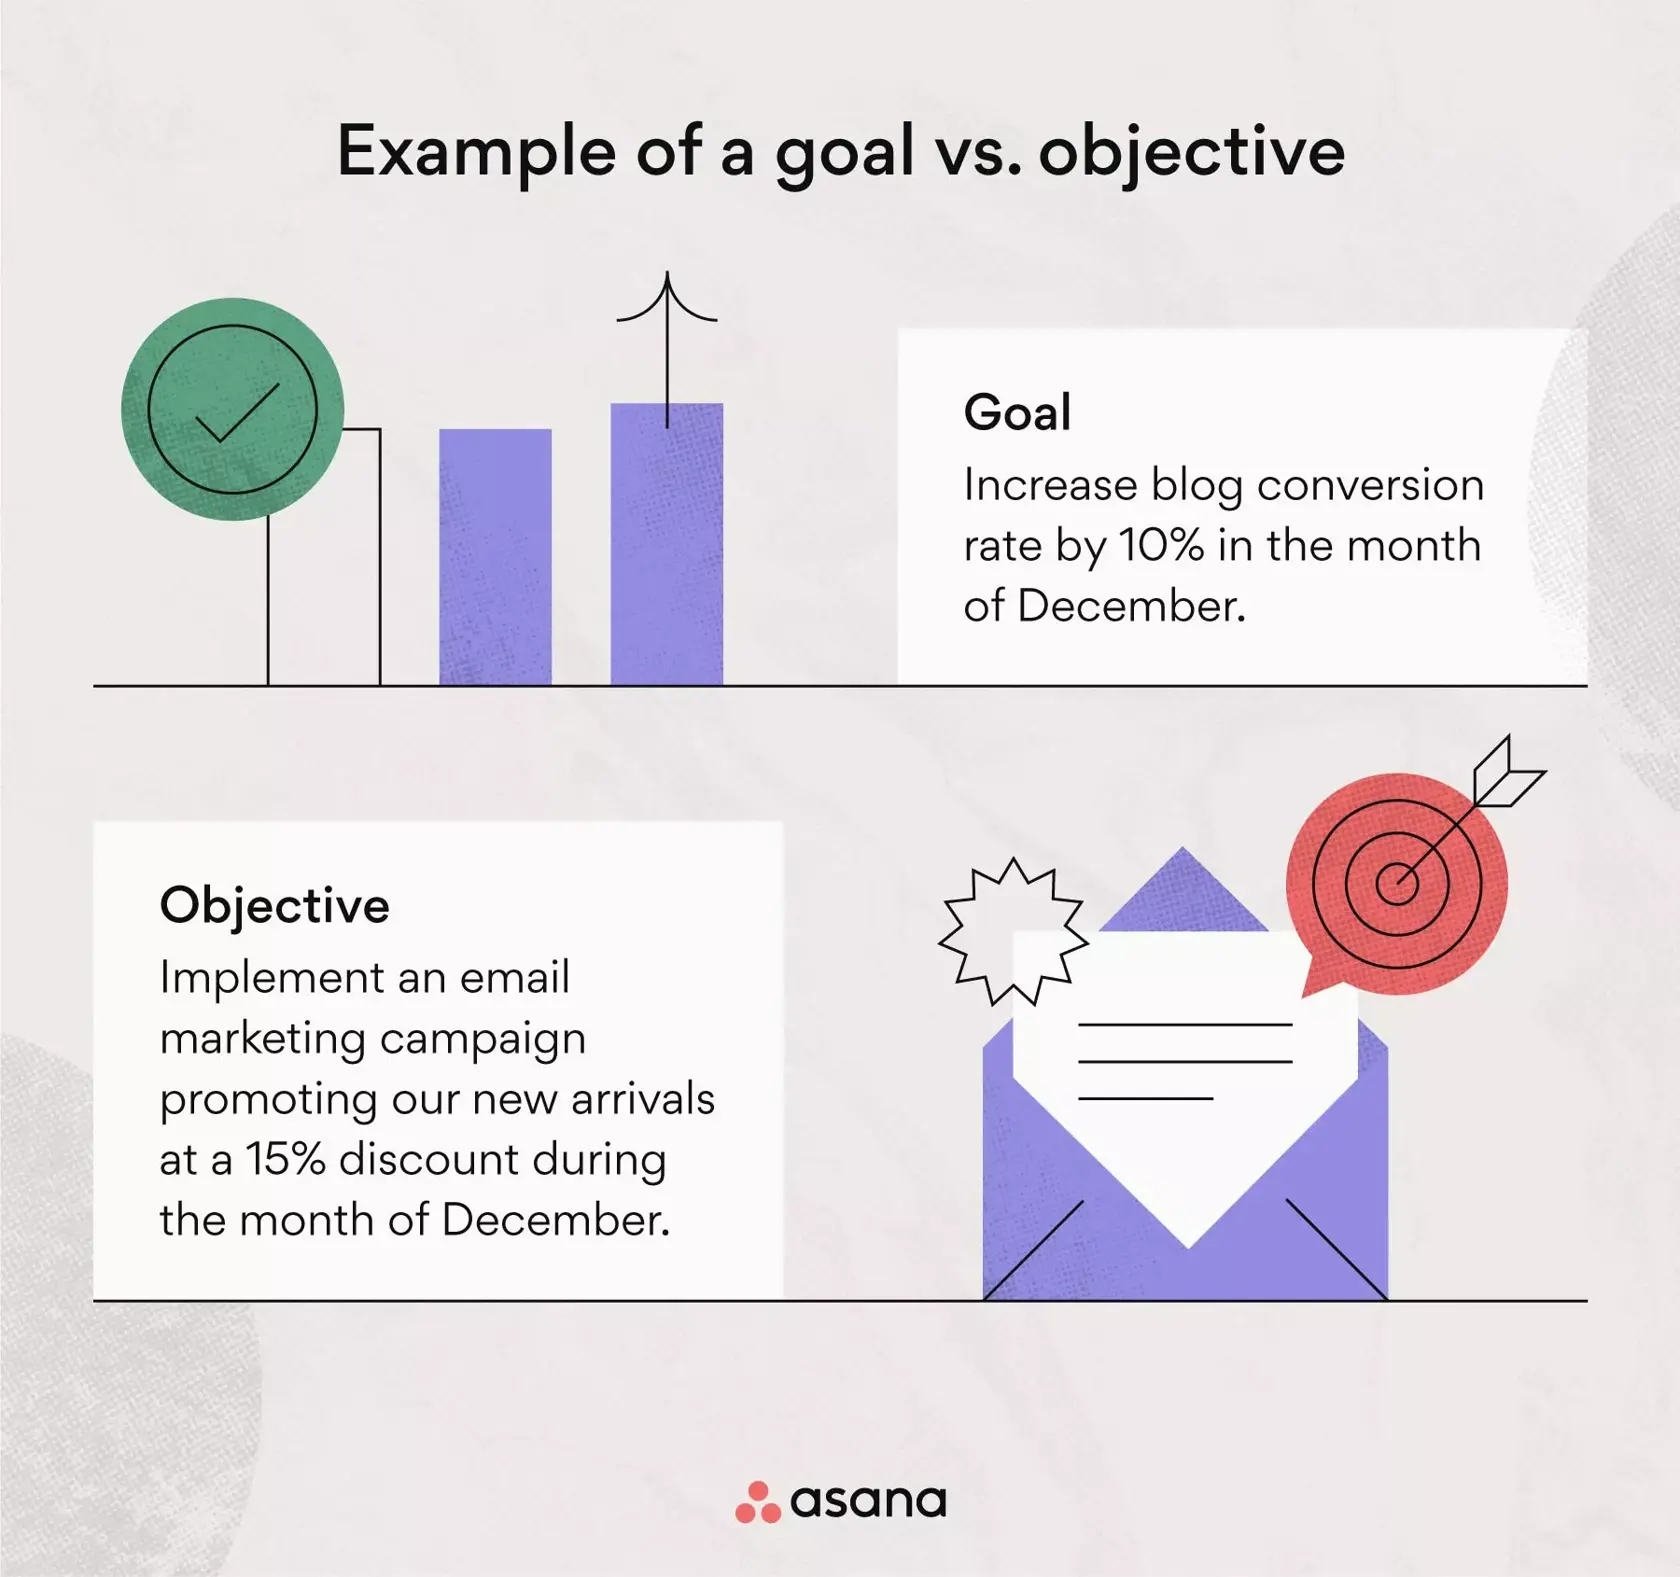 Examples of goals and objectives